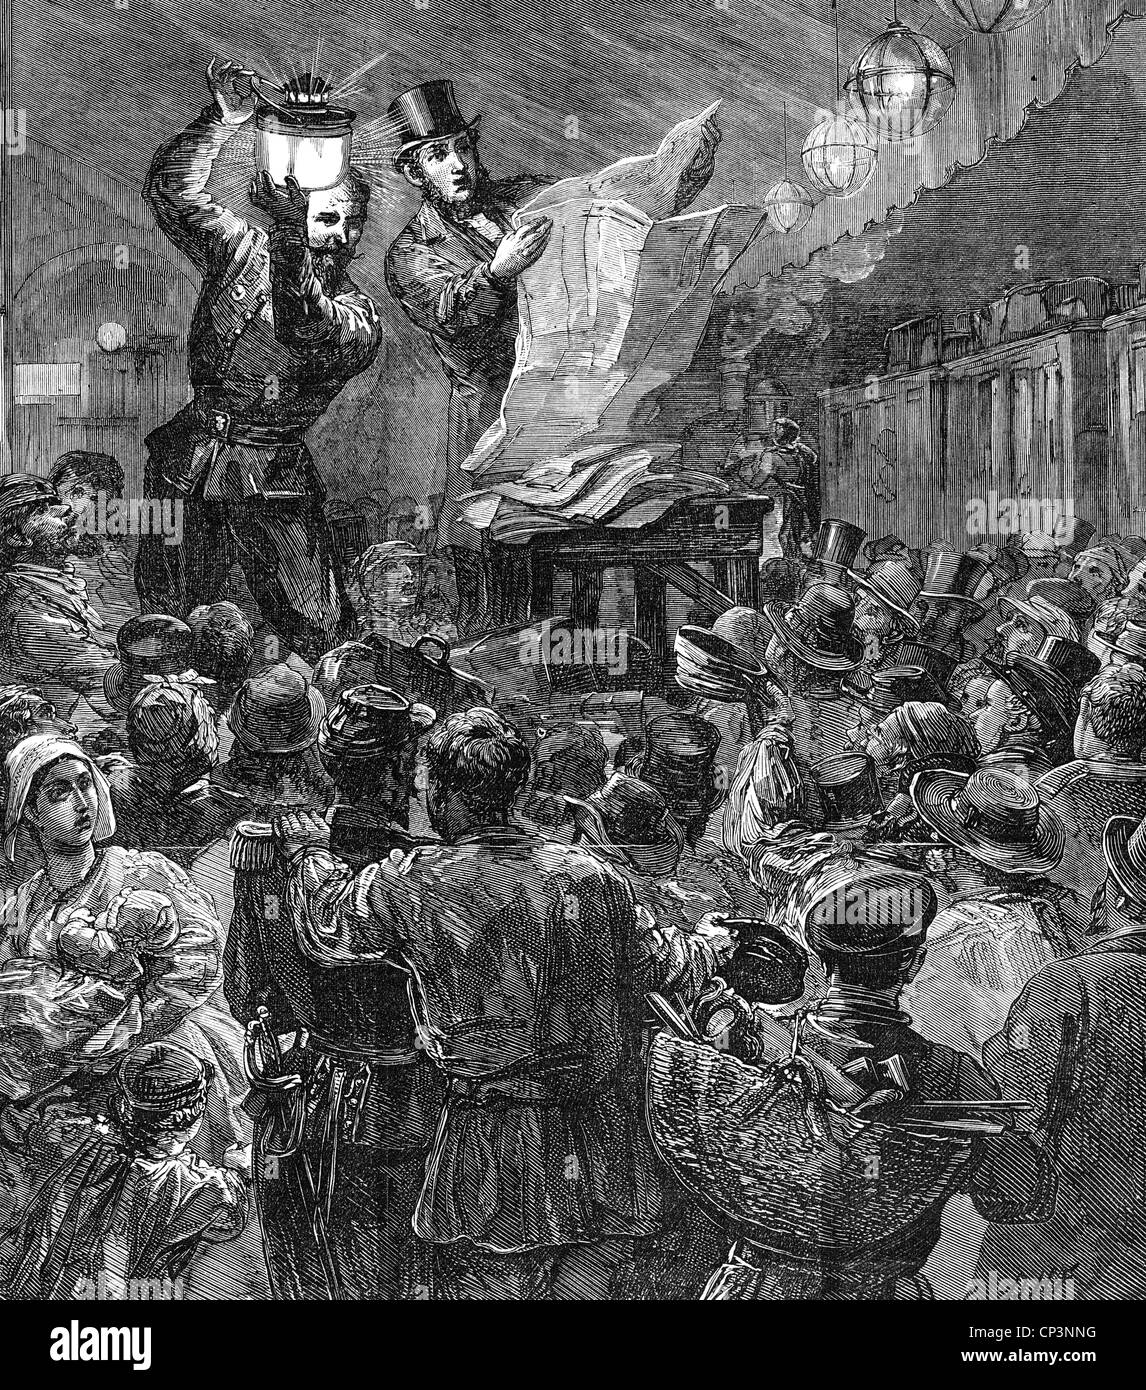 events, Franco-Prussian War 1870 - 1871, outbreak, reading of the Declaration of War on a railway station in France, 19.7.1870, contemporary wood engraving, people, crowd, politics, 19th century, Franco - Prussian, historic, historical, Additional-Rights-Clearences-Not Available Stock Photo